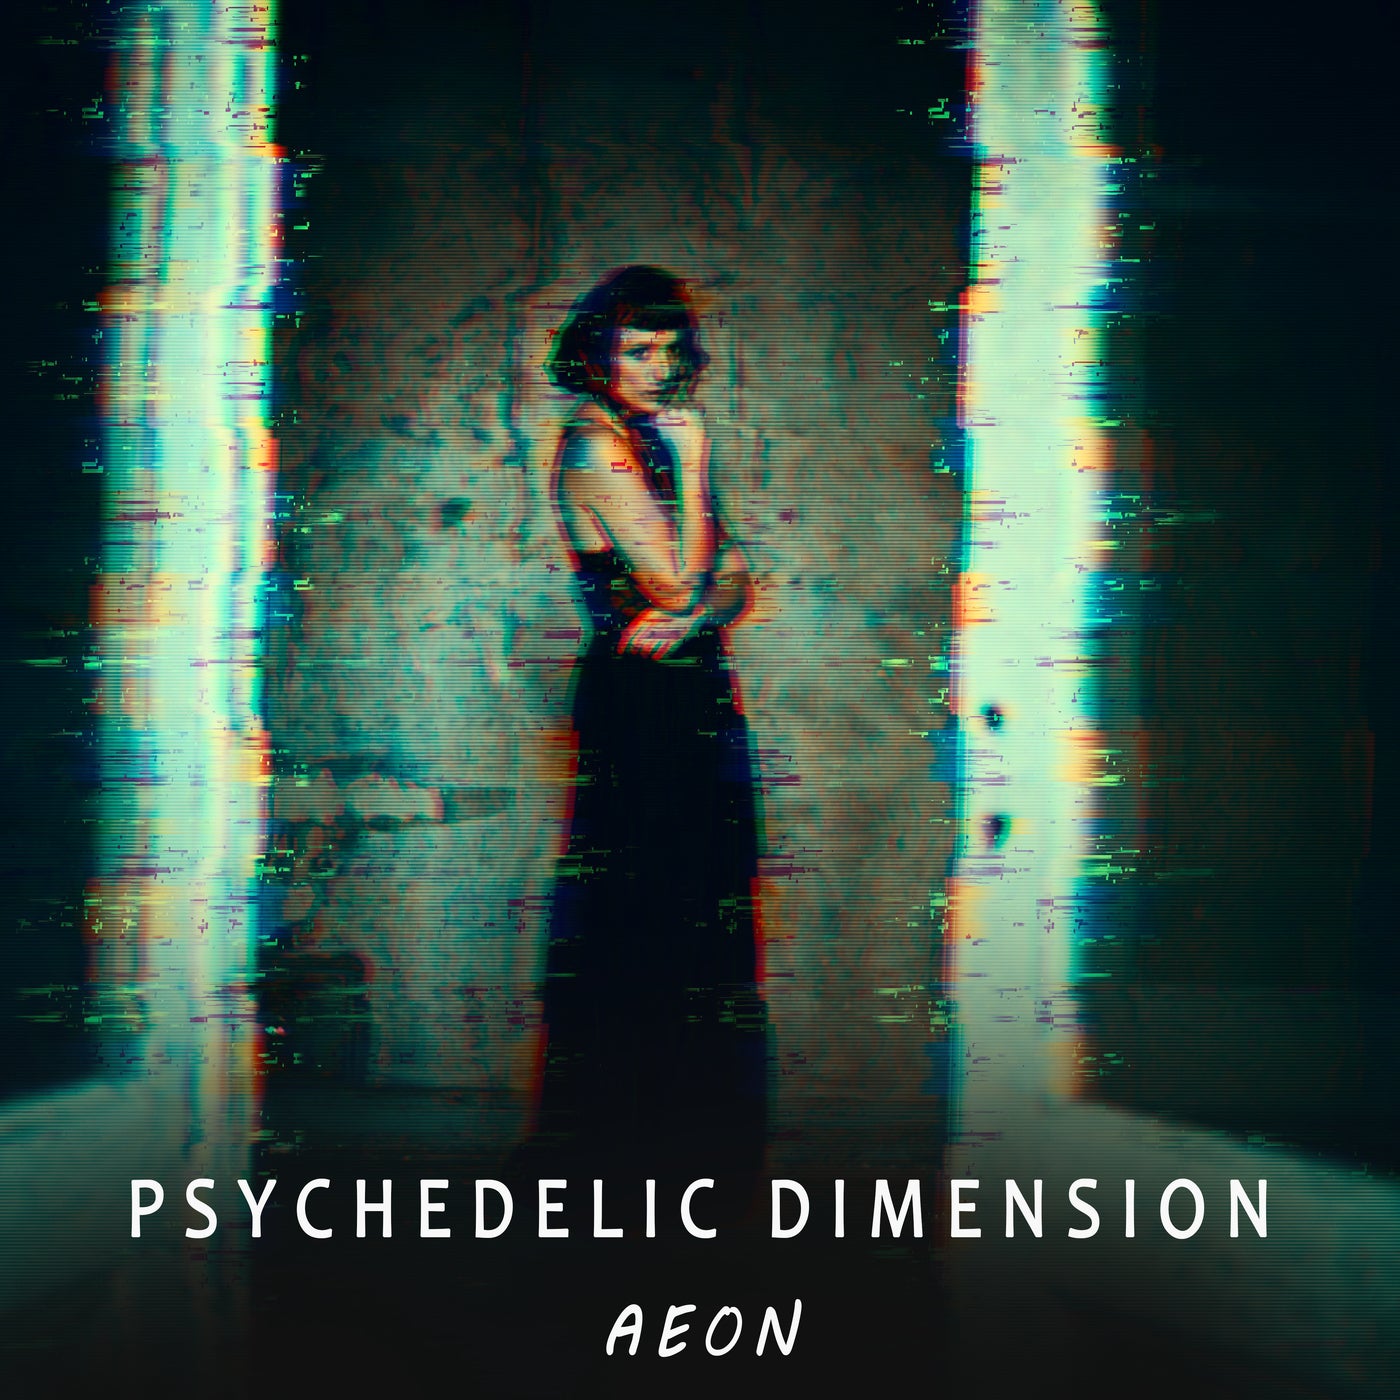 Psychedelic Dimension